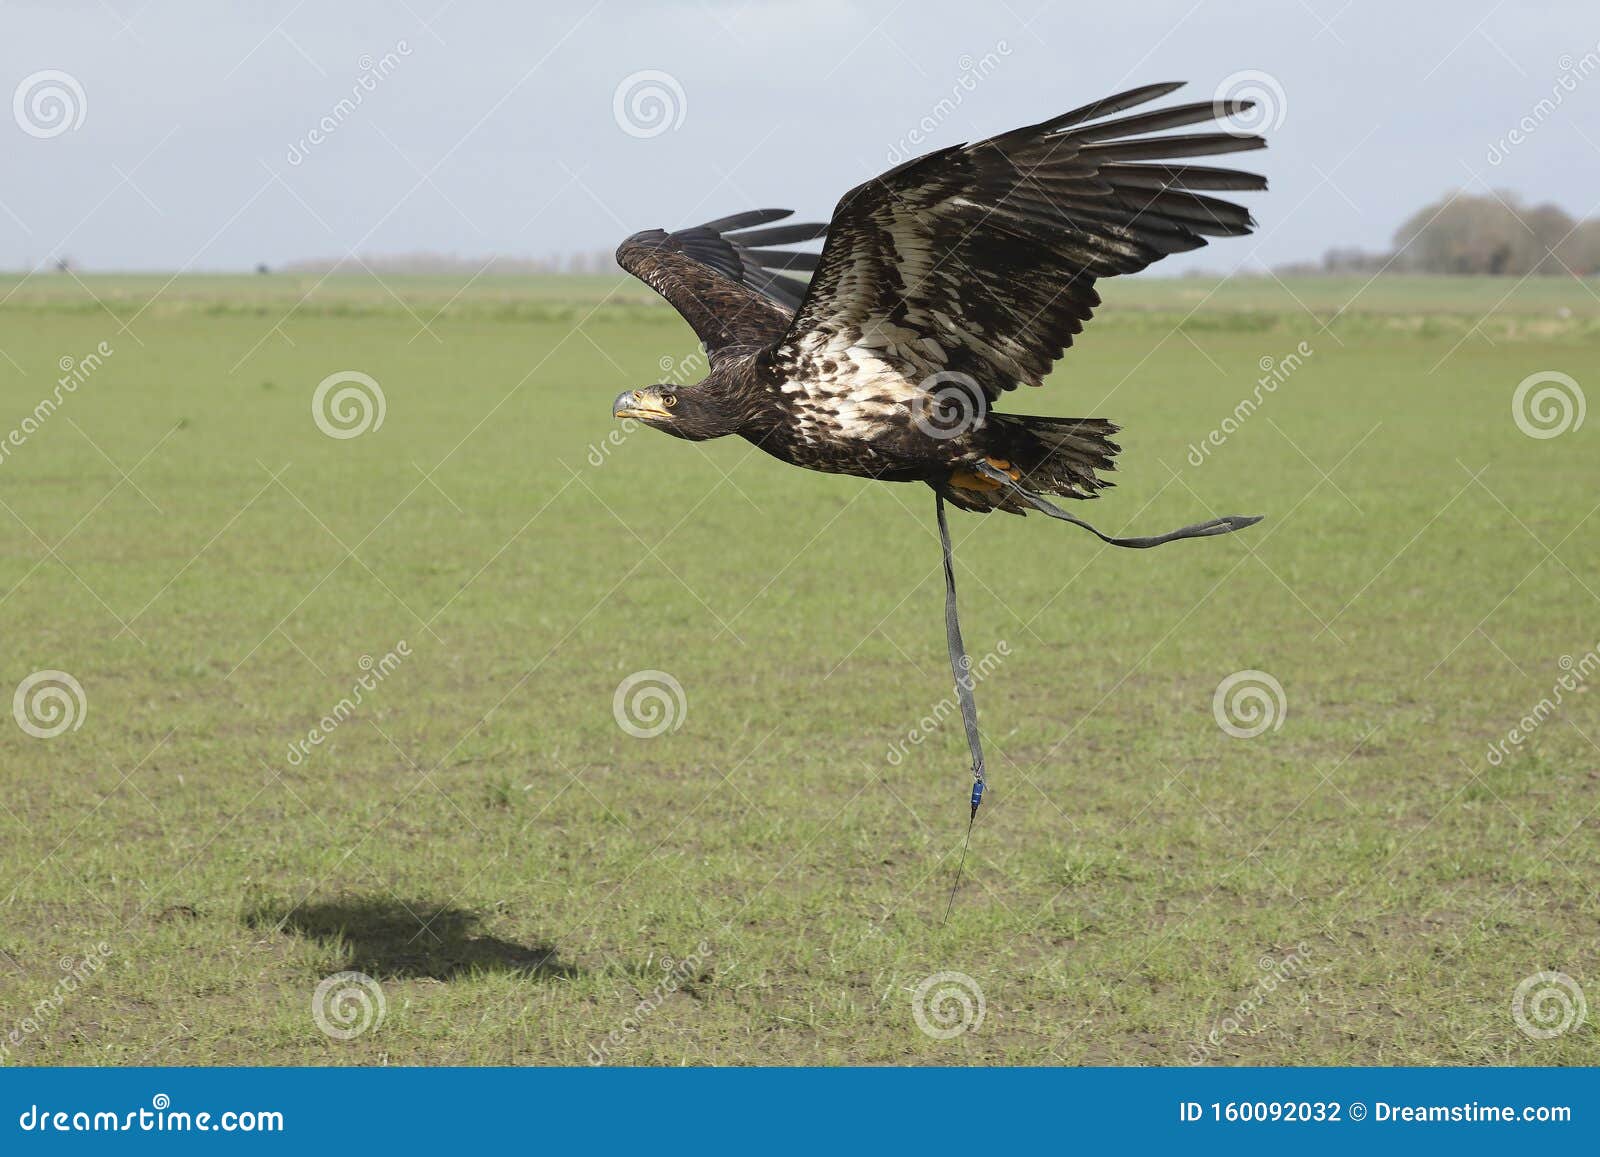 A Juvenile Bald Eagle In Flight Stock Photo Image Of Accipitriformes Lines 160092032